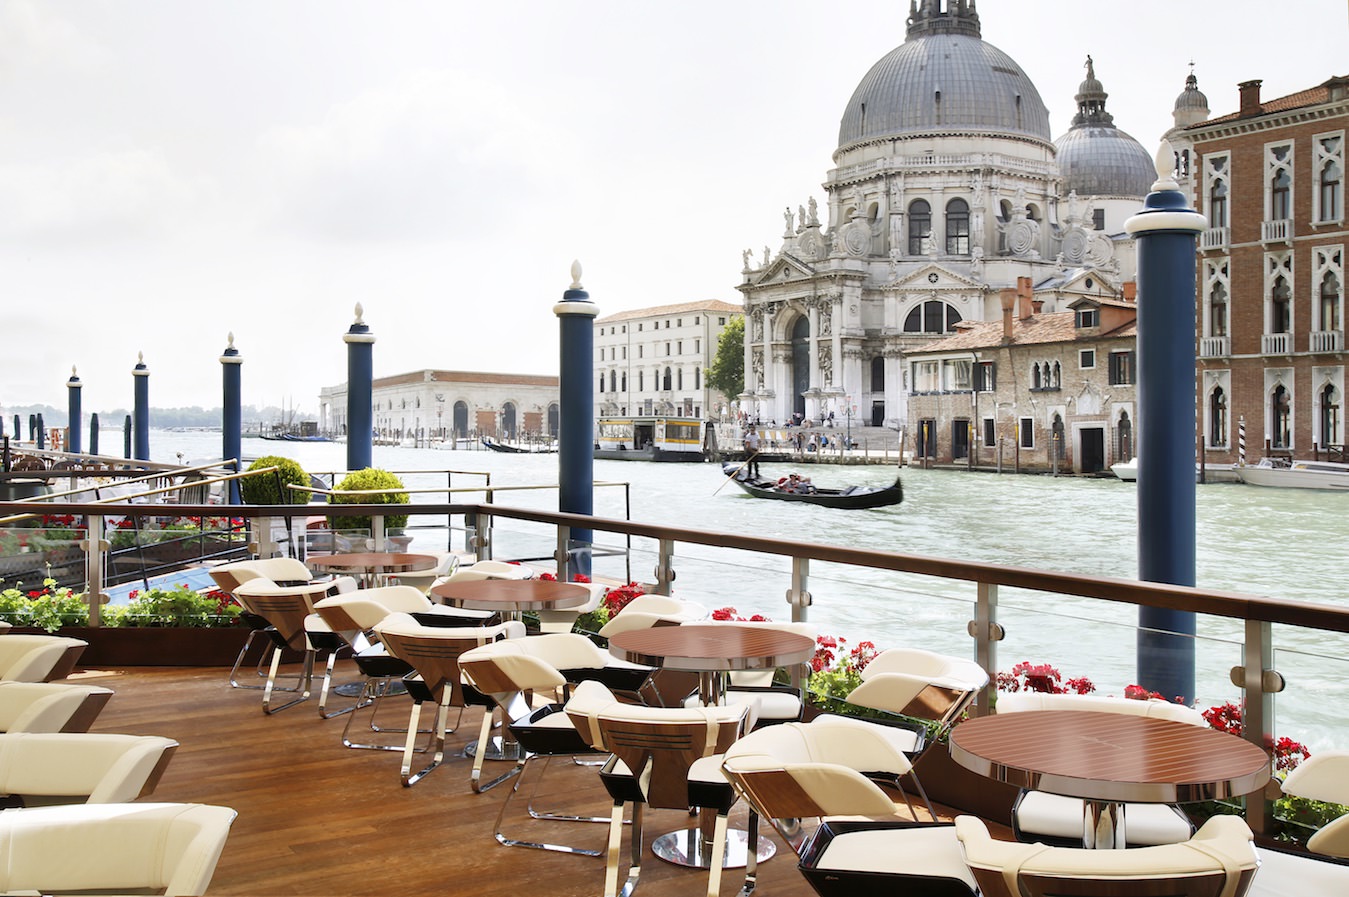 9 Best Venice Hotels to Stay in During the Venice Biennale